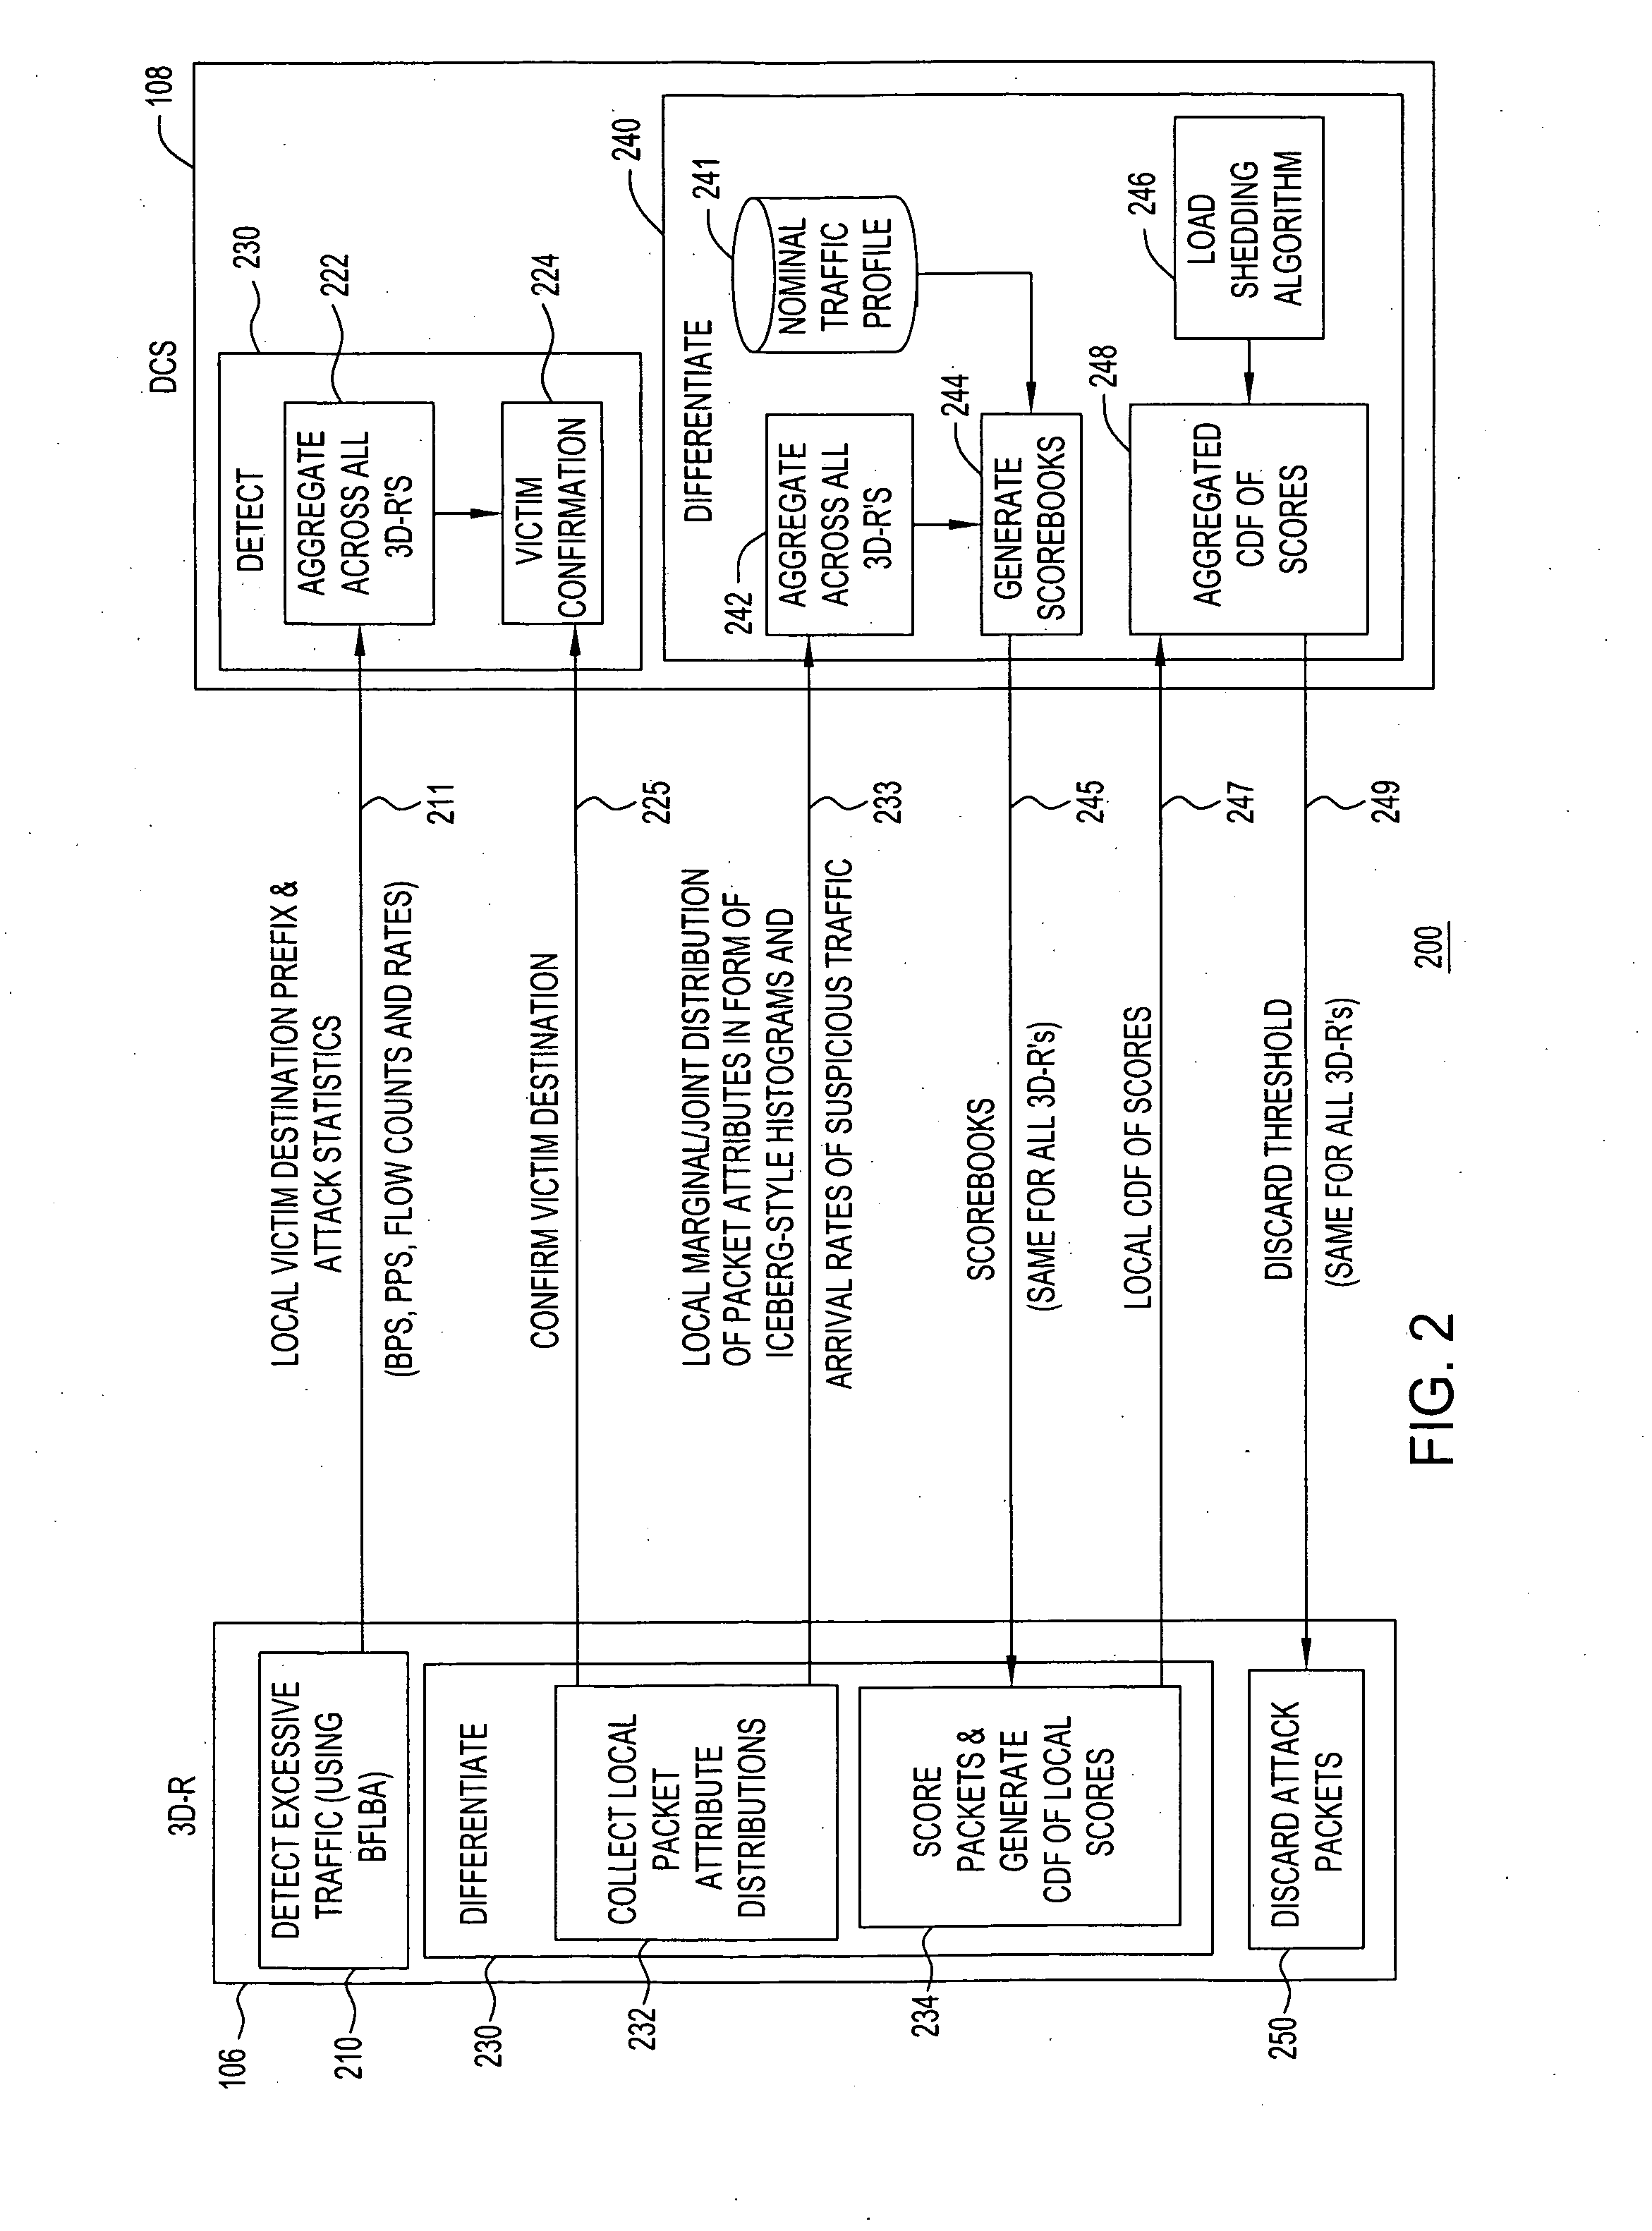 Distributed architecture for statistical overload control against distributed denial of service attacks